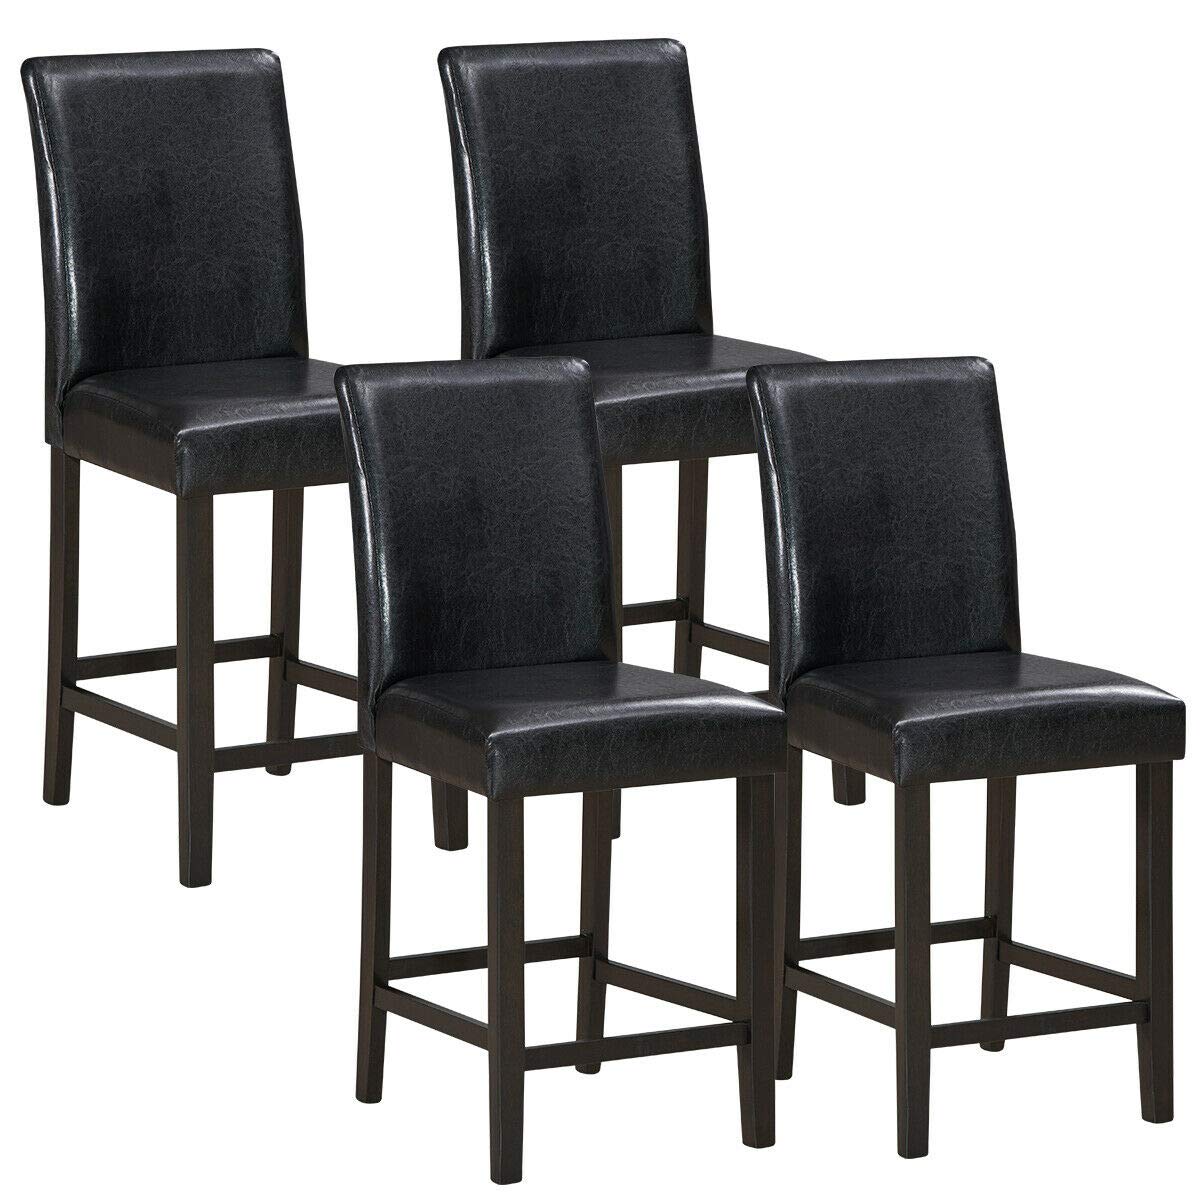 Giantex 25 inch Wooden Vintage Bar Chairs, Counter Stools w/ Upholstered Foam Cushion & Solid Rubber Wood Legs